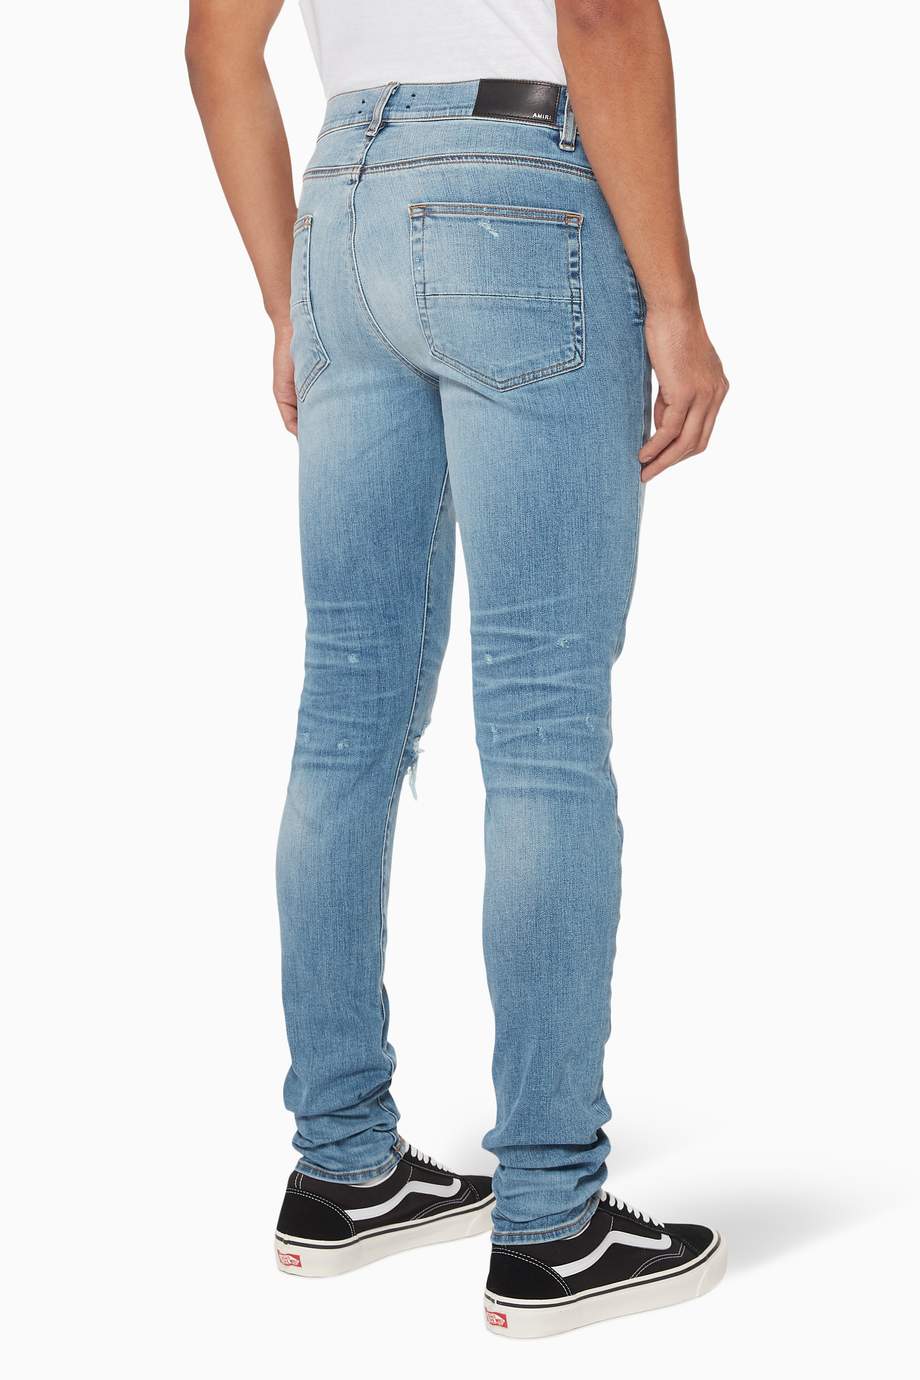 Shop Amiri Blue Distressed & Ripped Knee Jeans for Men | Ounass UAE